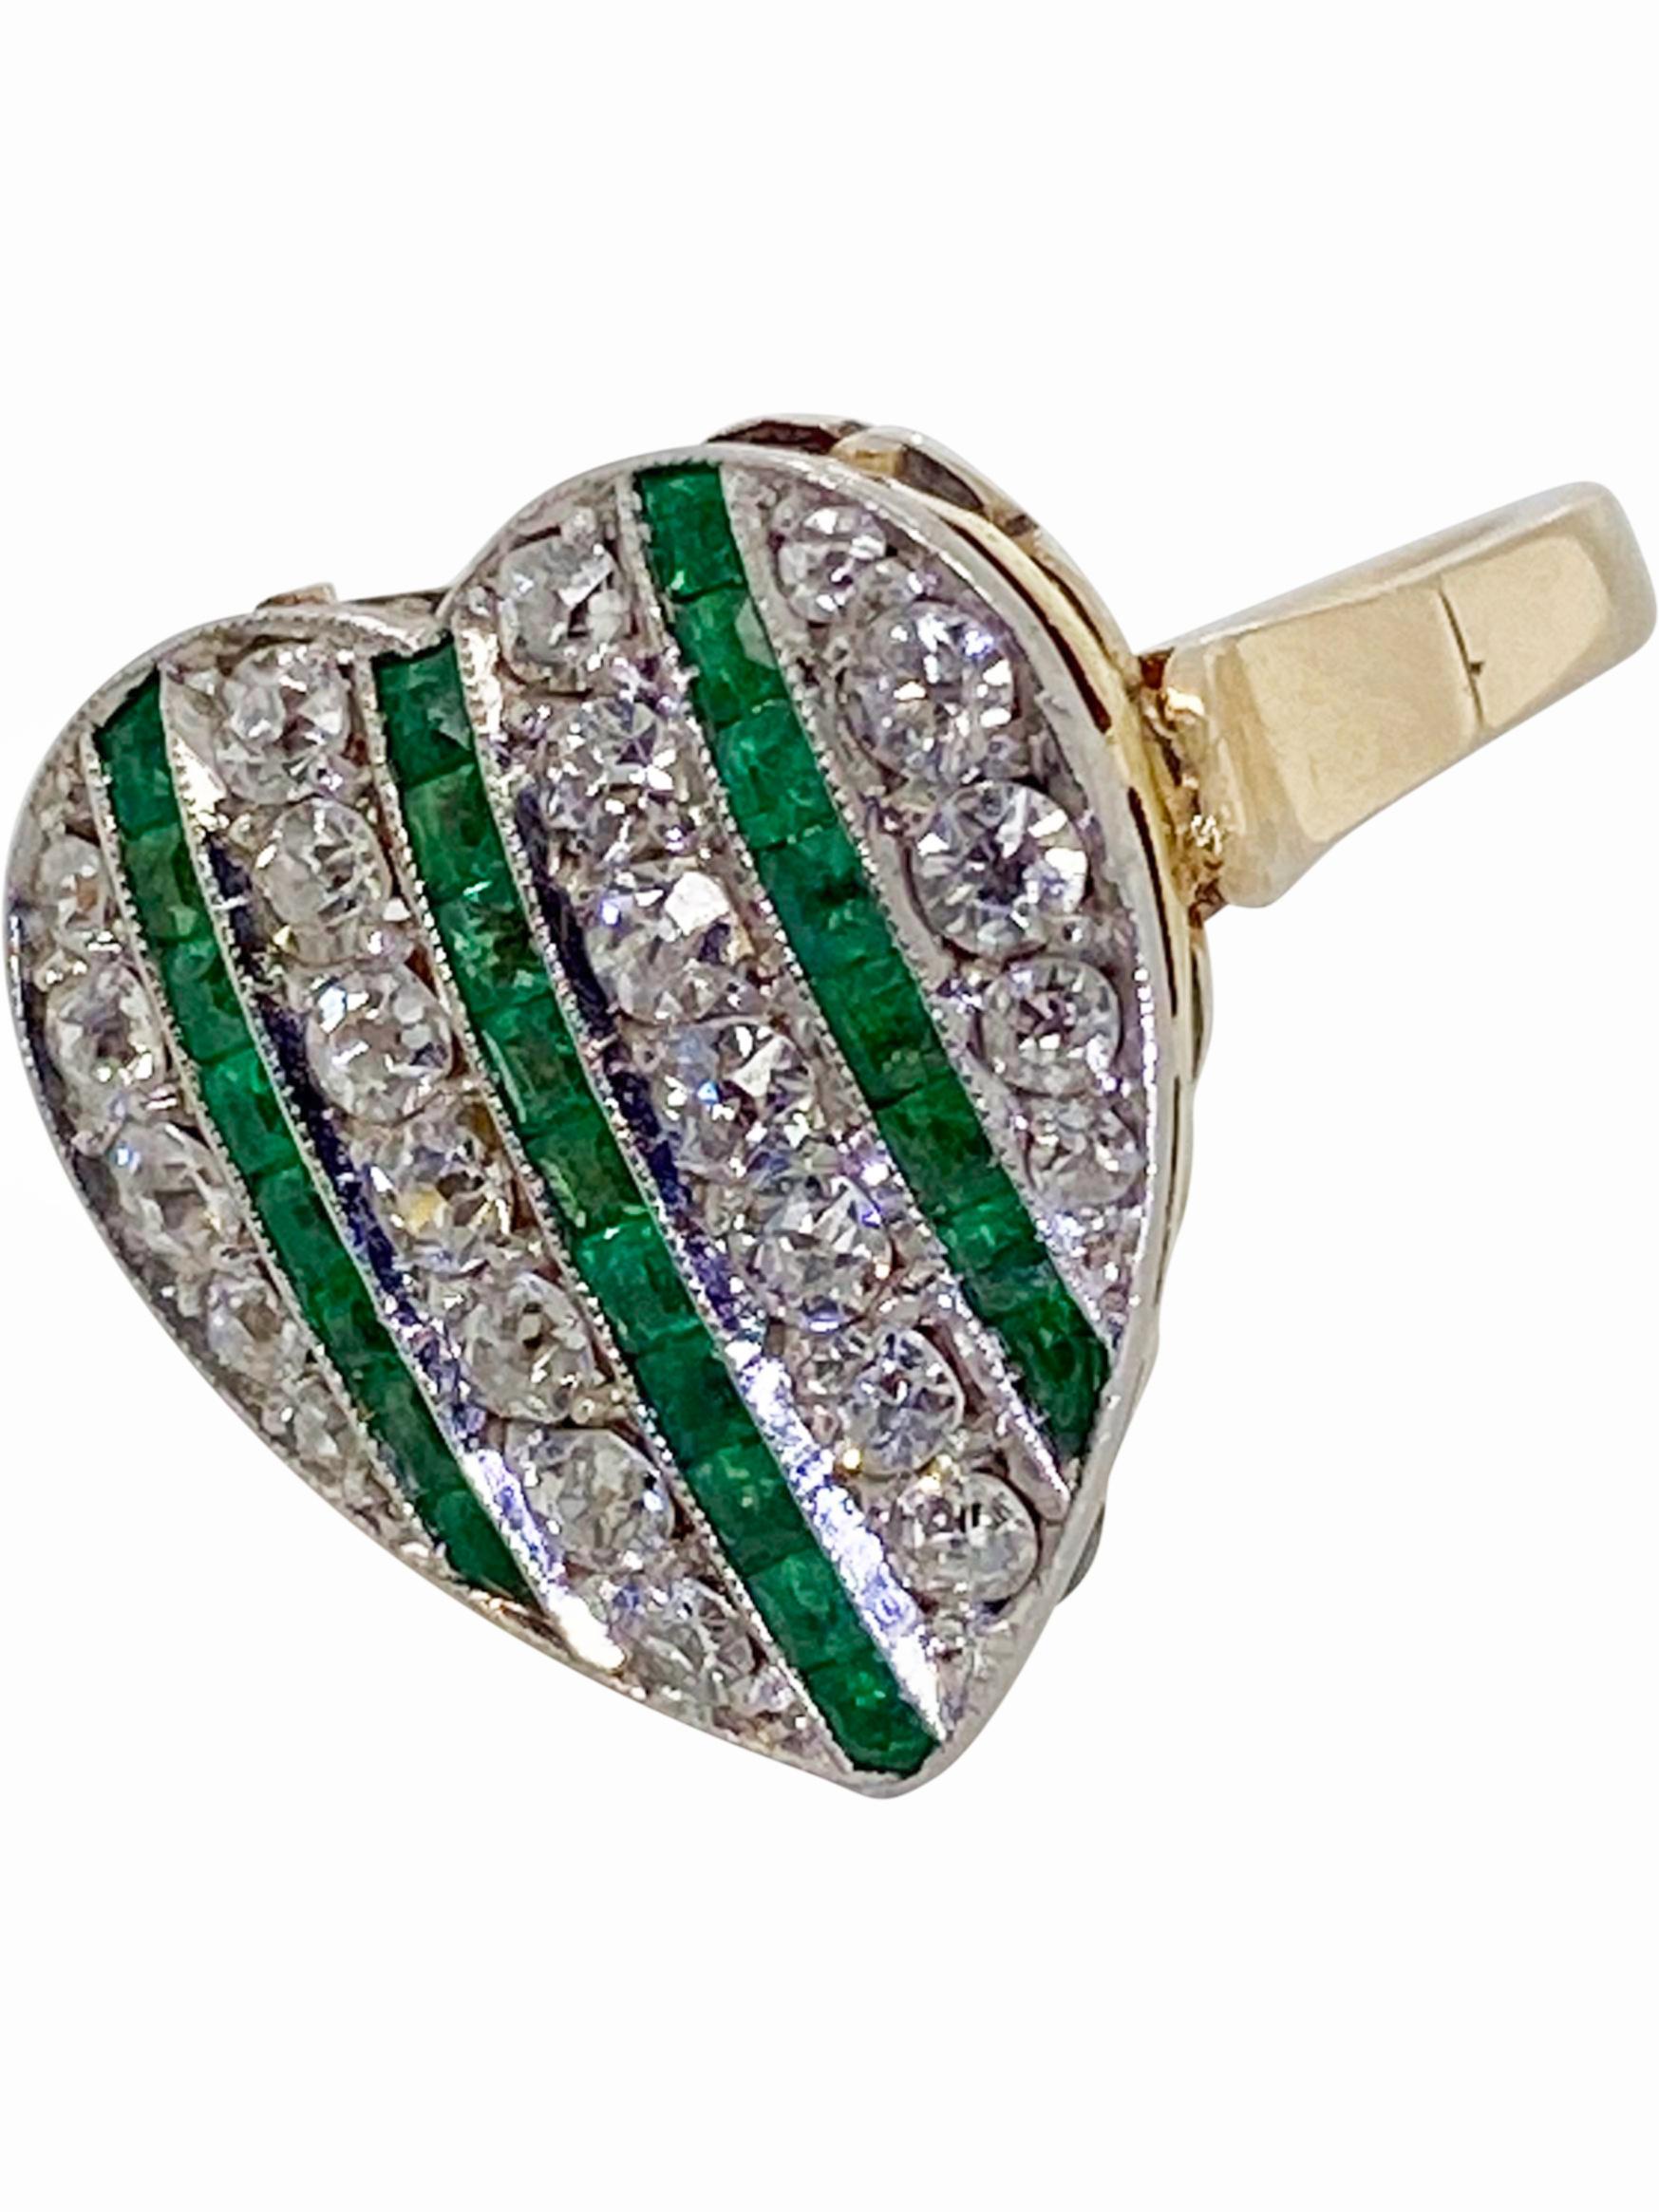 A ring to represent romance, the classic heart shaped style is timeless and has so much appeal. It represents love and what's not to love about this gorgeous style. Three rows of step cut emeralds run through the heart all mounted in platinum with